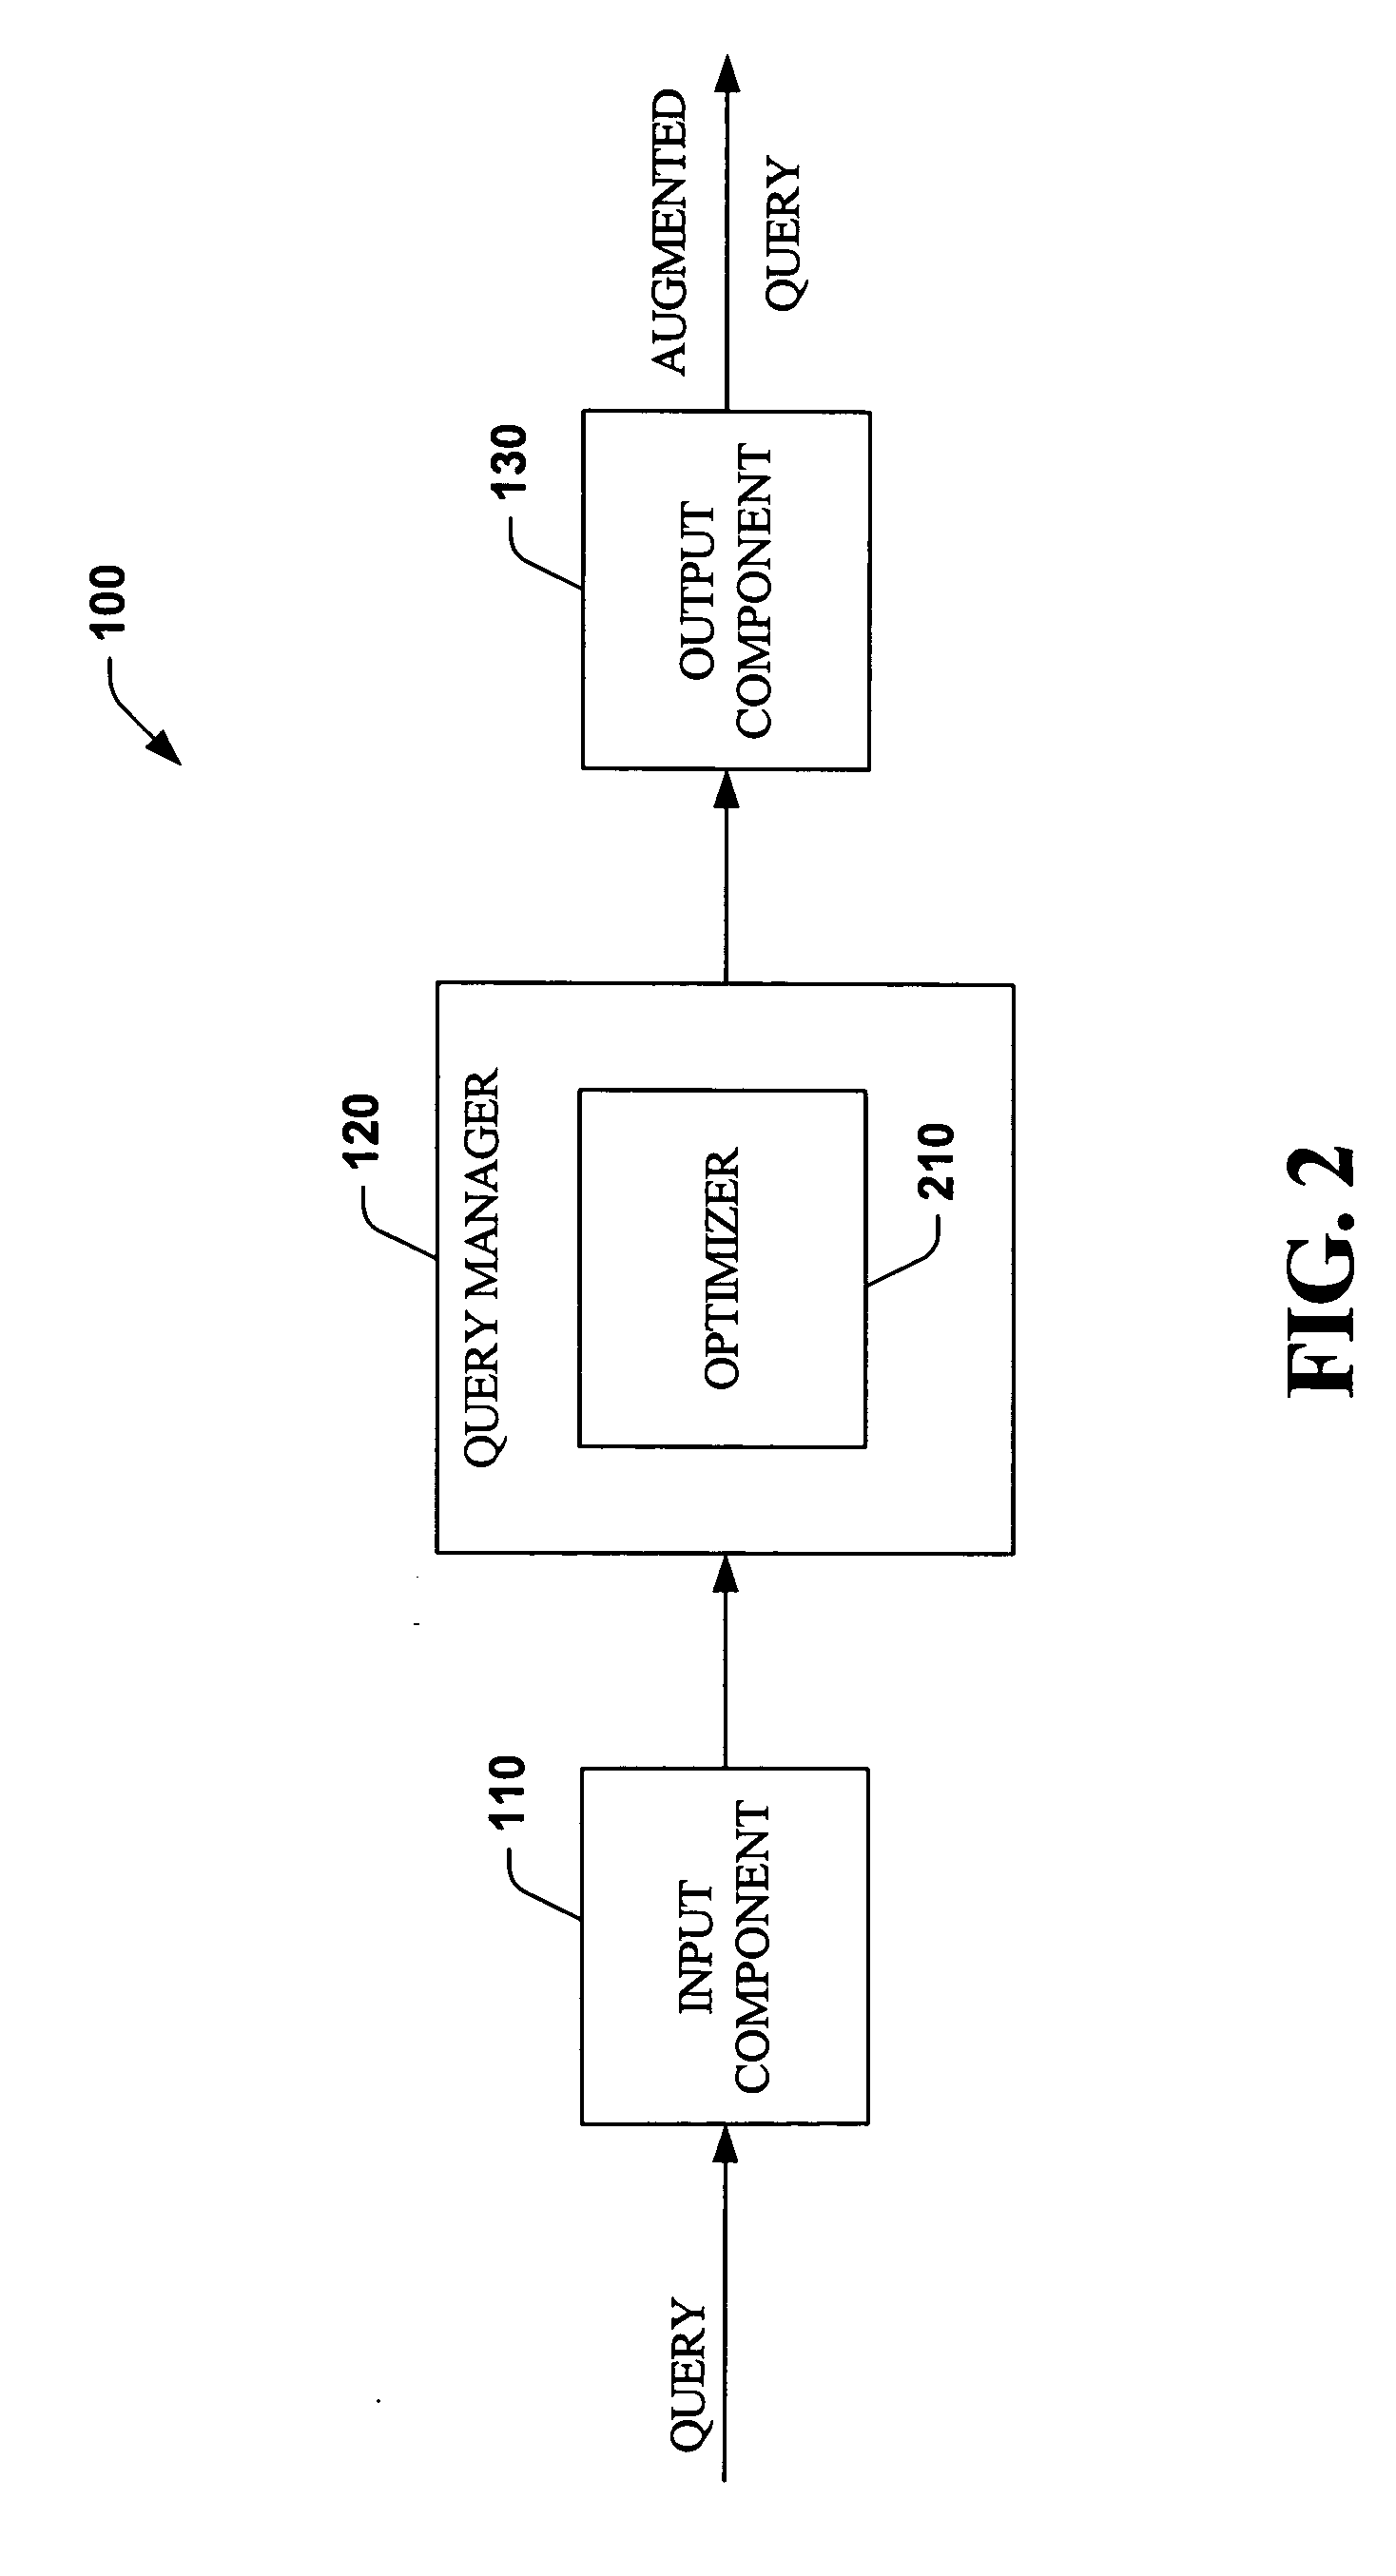 Systems and methods that optimize row level database security